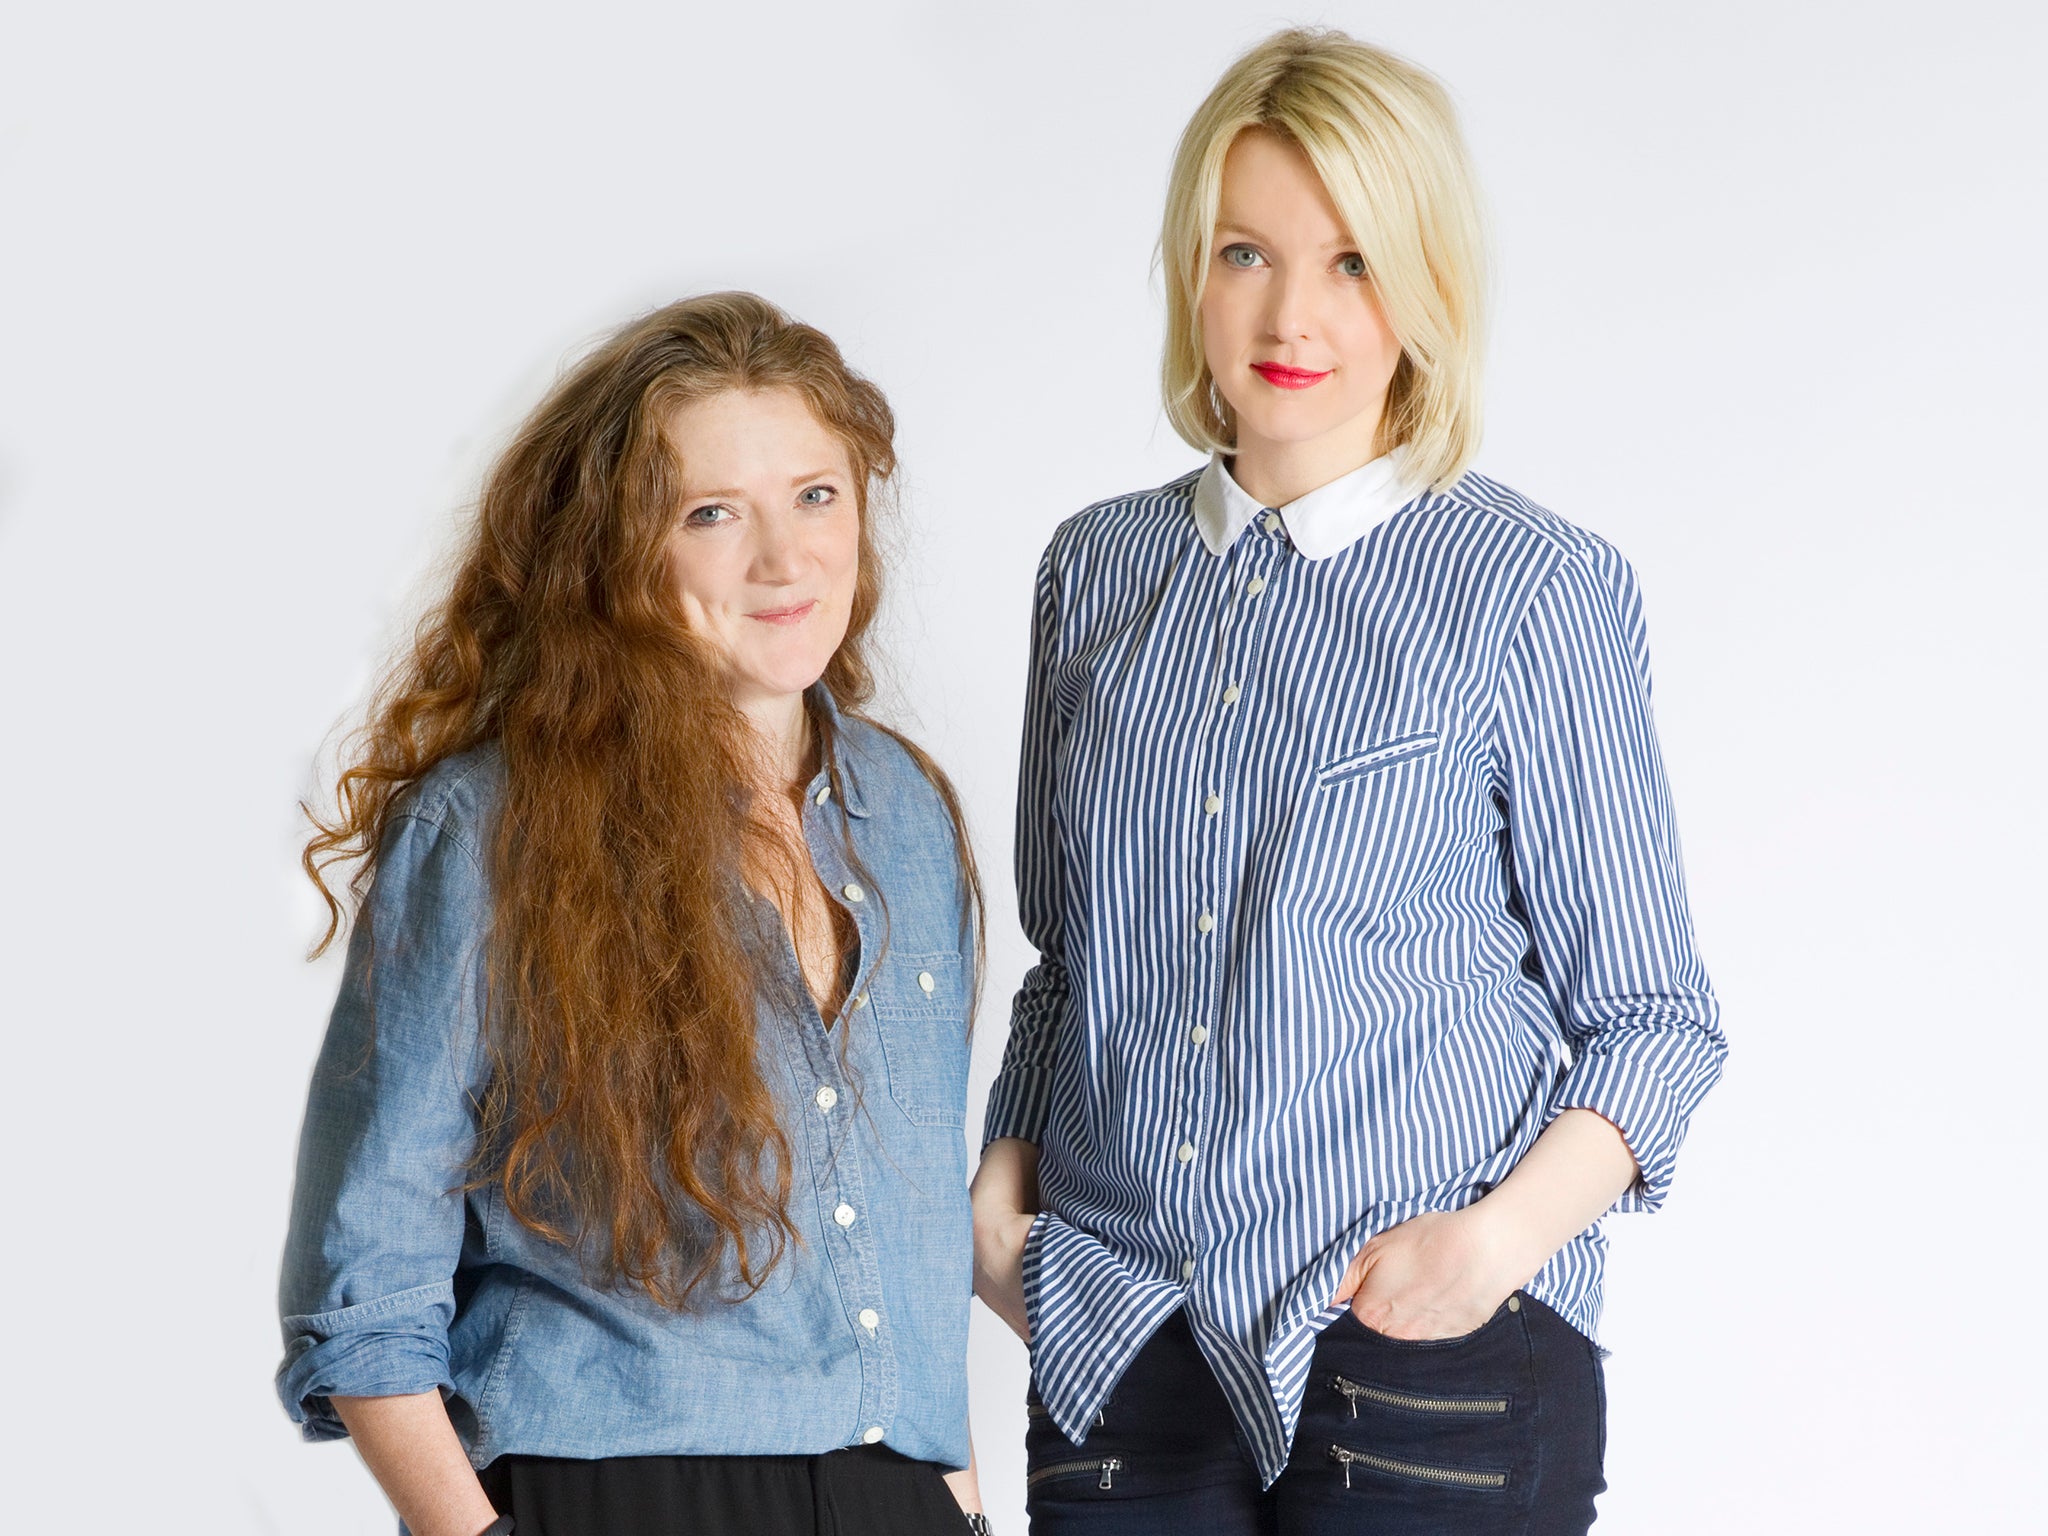 Sam Baker, left, and Lauren Laverne have created the website for women: smart, funny, down to earth, and written by a “pool” of female writers